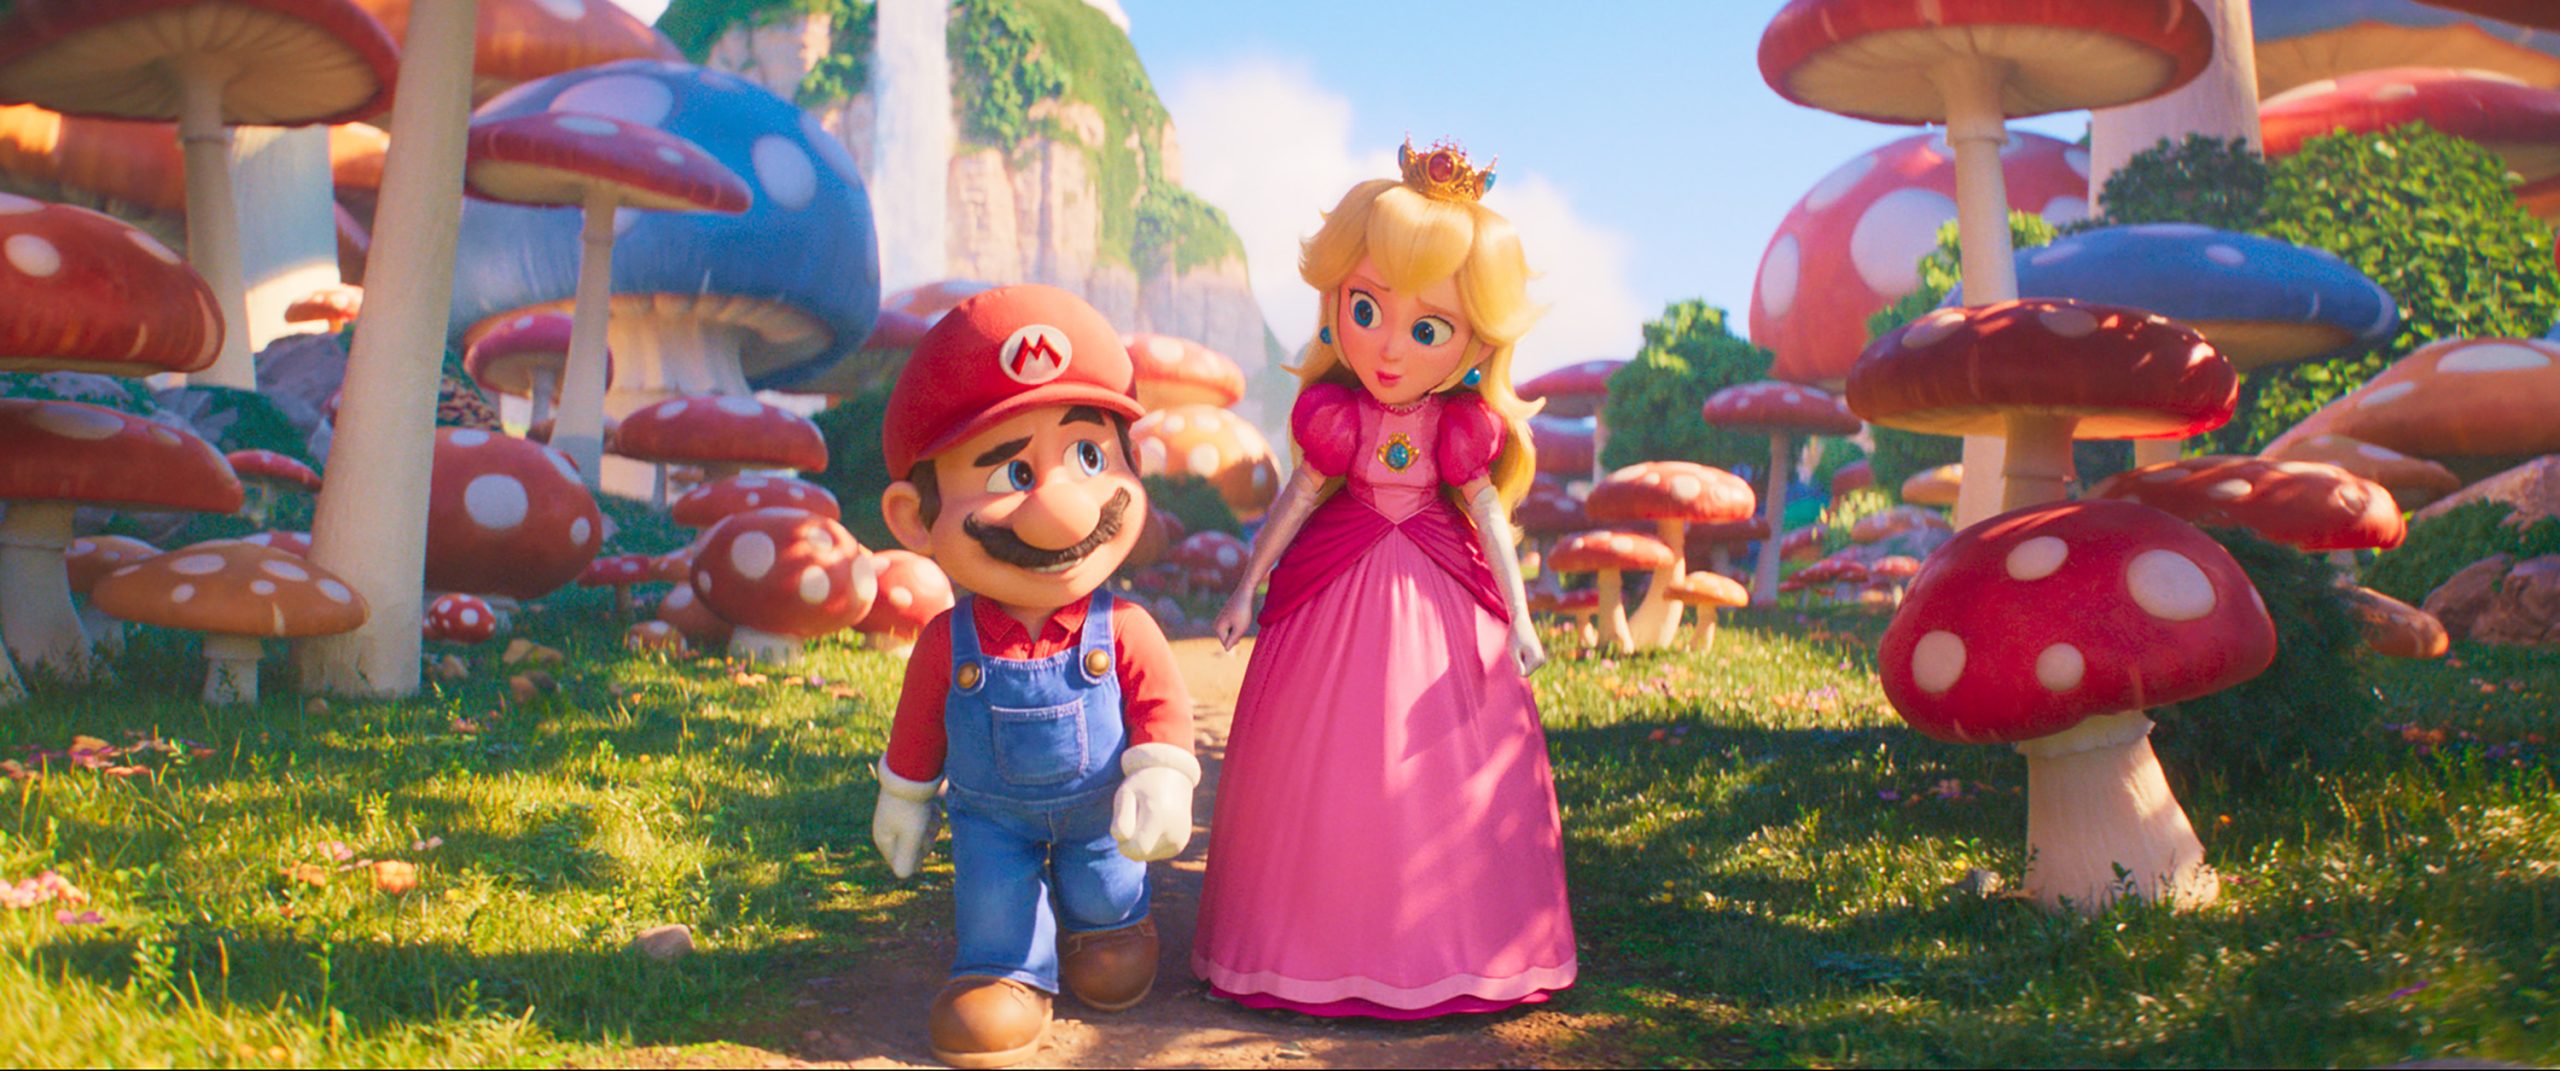 The Mario Movie Feels Like a Foundation for a Much Better Sequel